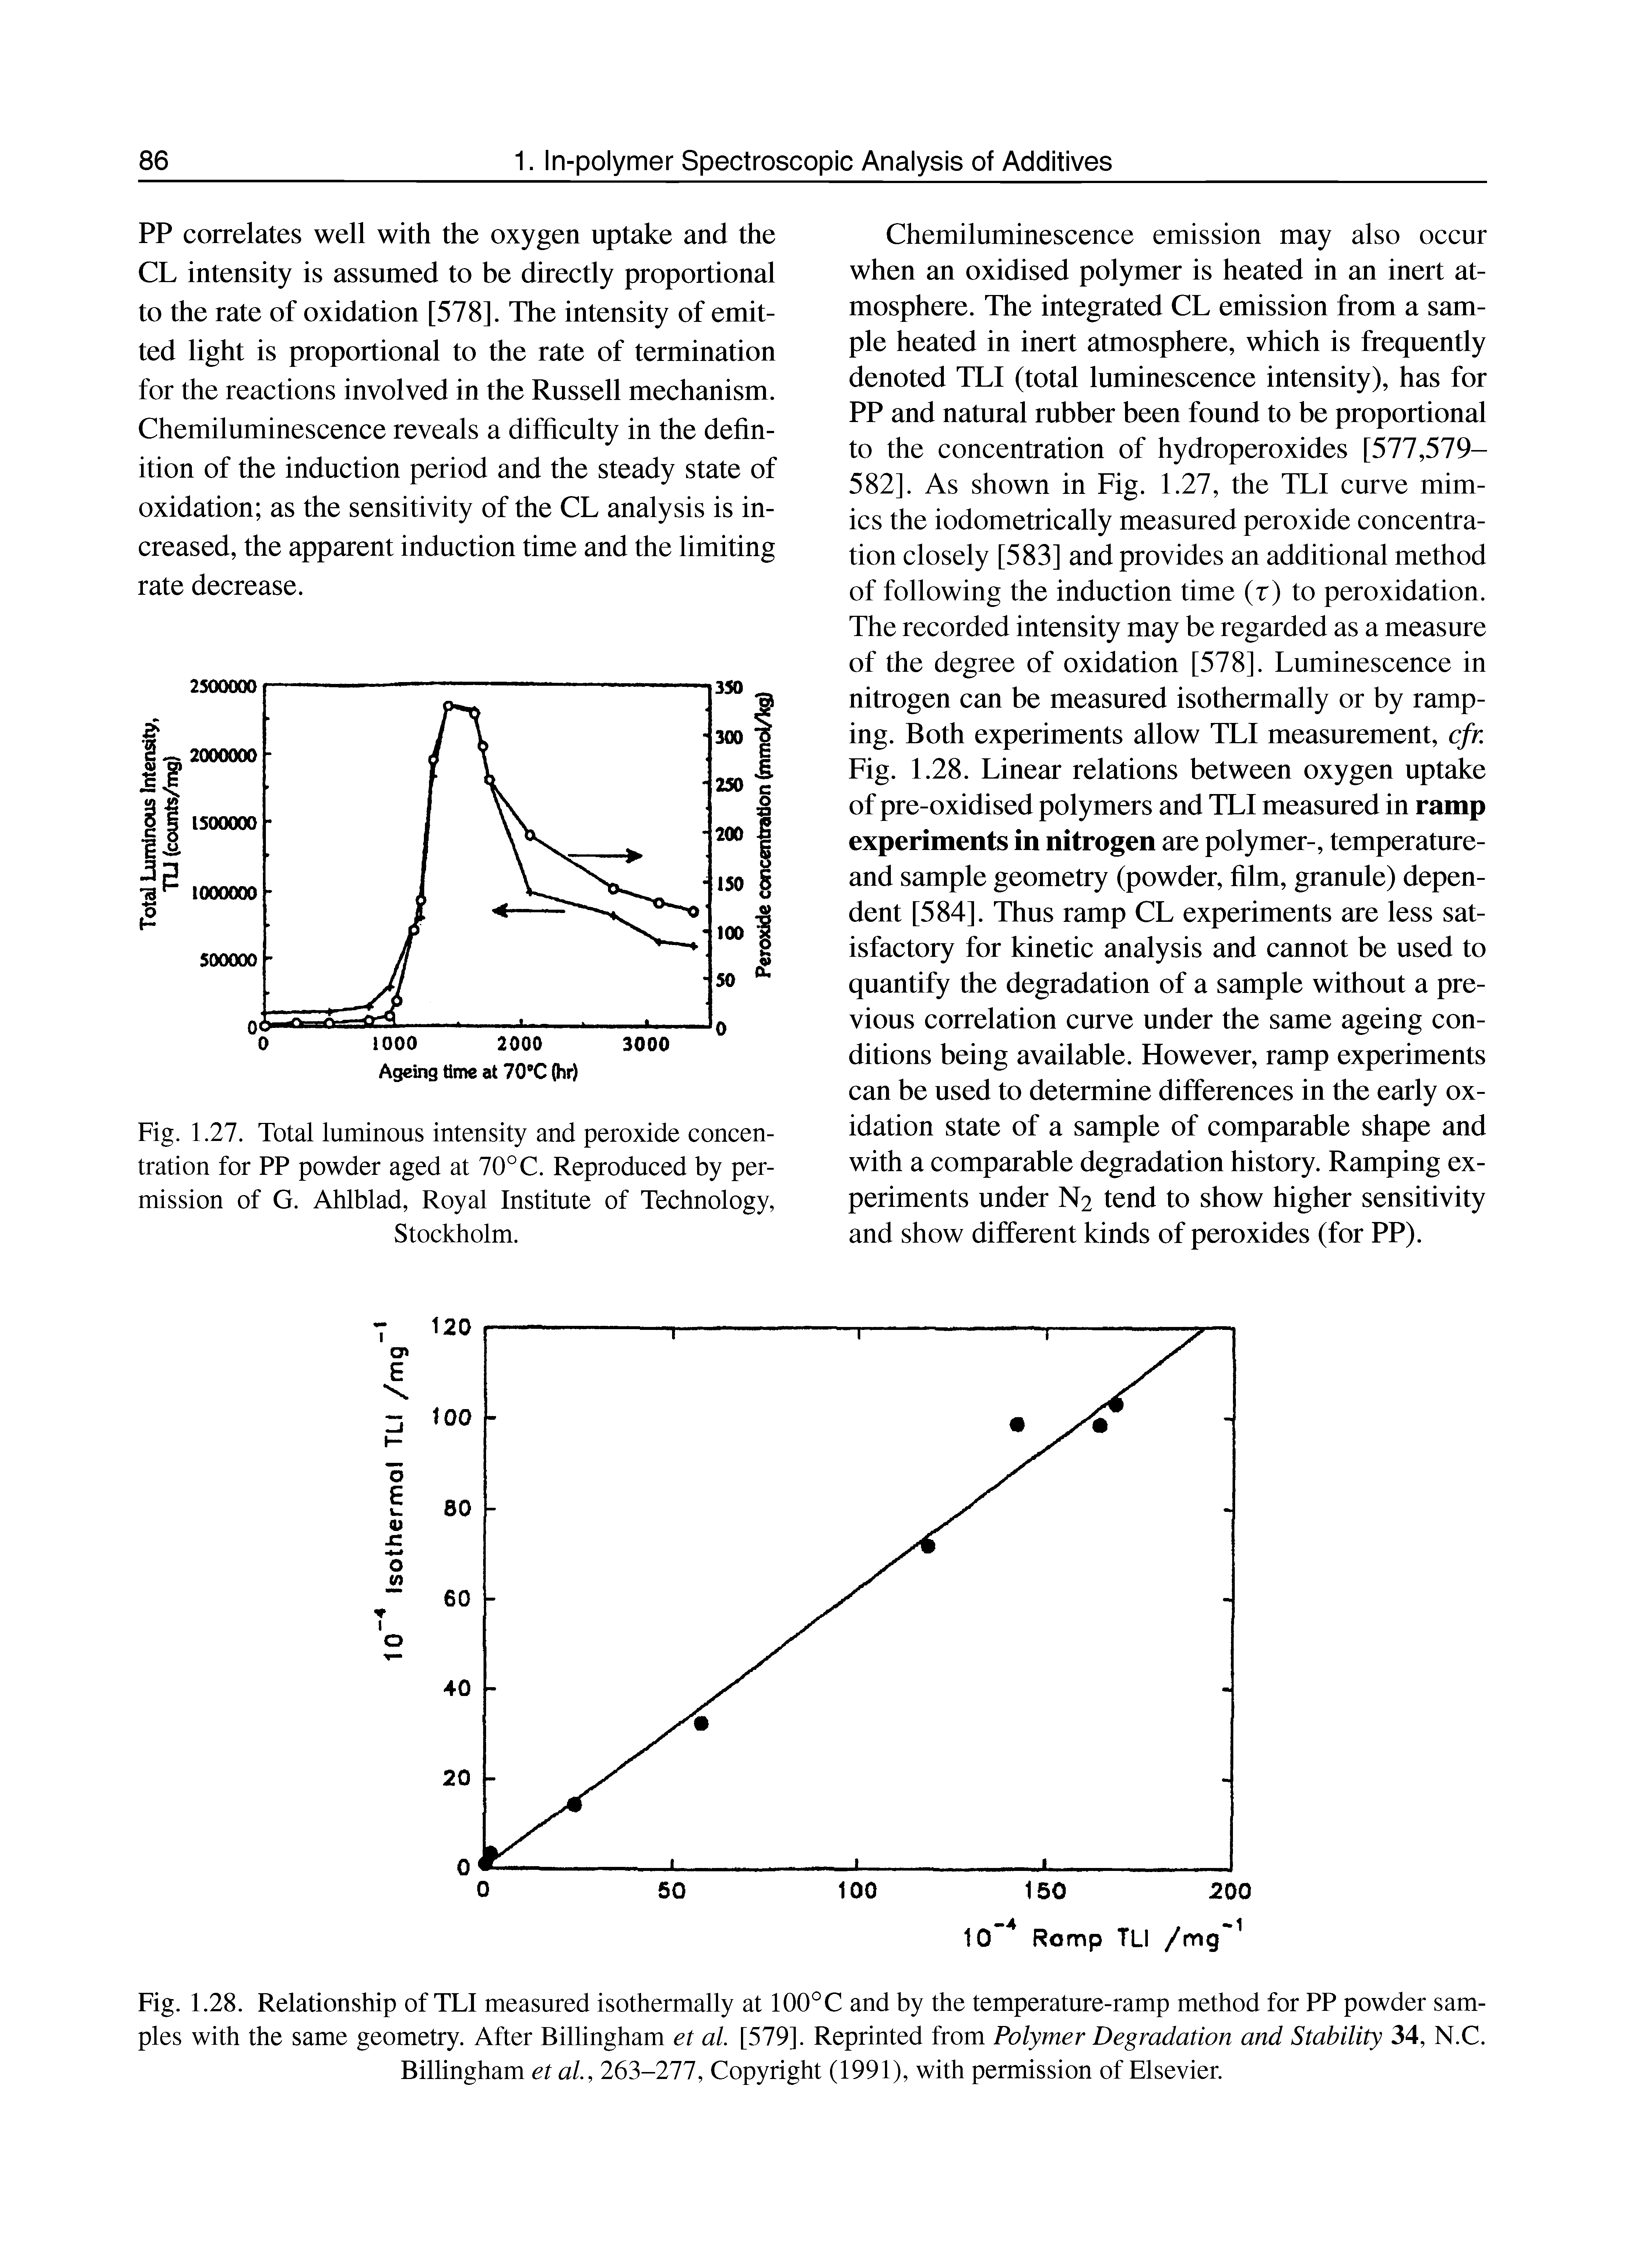 Fig. 1.27. Total luminous intensity and peroxide concentration for PP powder aged at 70°C. Reproduced by permission of G. Ahlblad, Royal Institute of Technology, Stockholm.